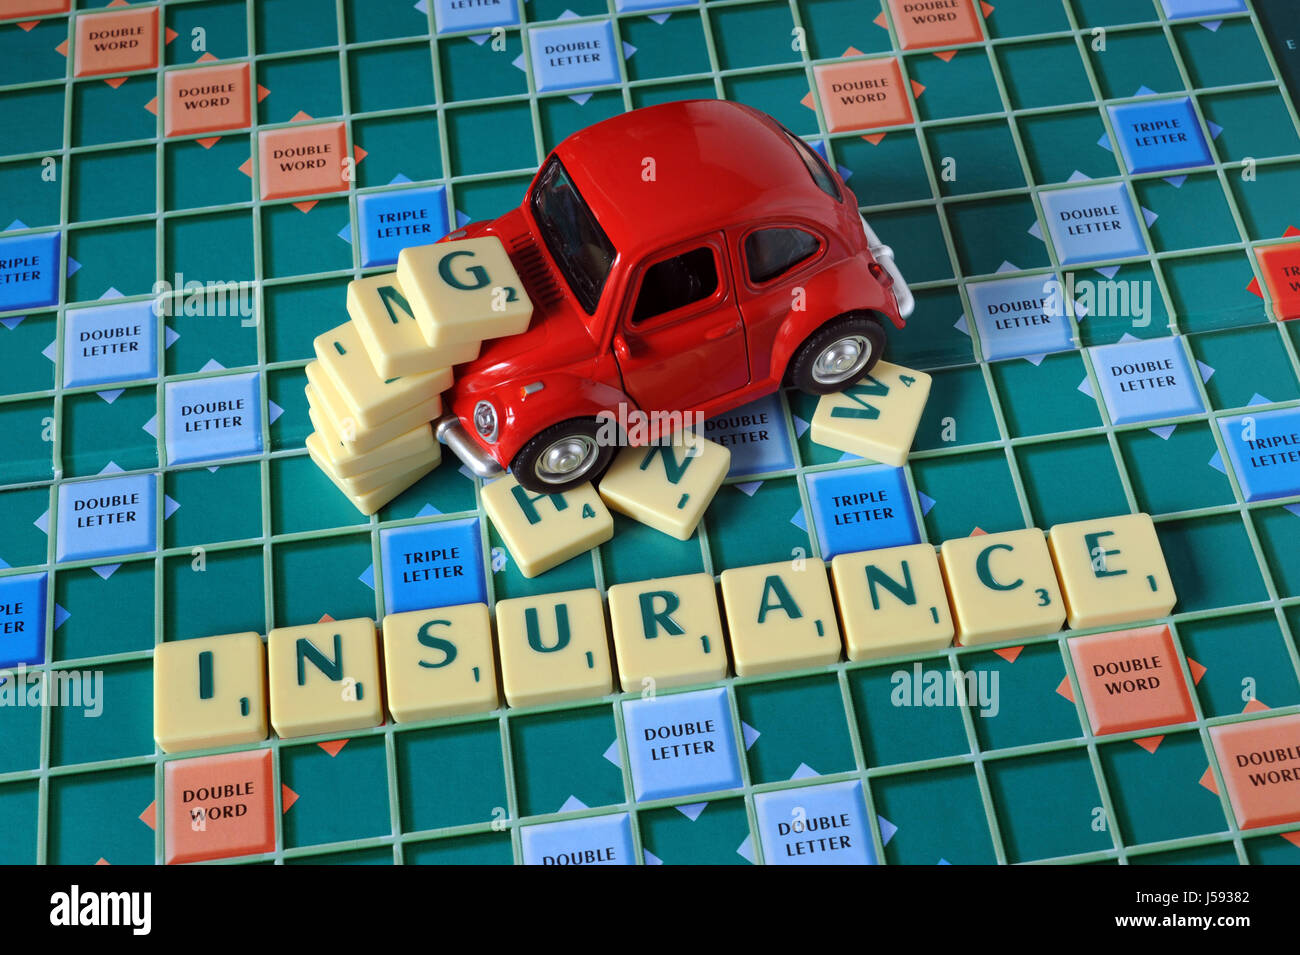 MODEL CAR ON WORD TILE SCRABBLE BOARD SPELLING 'INSURANCE' RE CAR INSURANCE ACCIDENT CLAIMS WHIPLASH MOTOR CRASH BUMP PREMIUMS COSTS COST PRICES UK Stock Photo